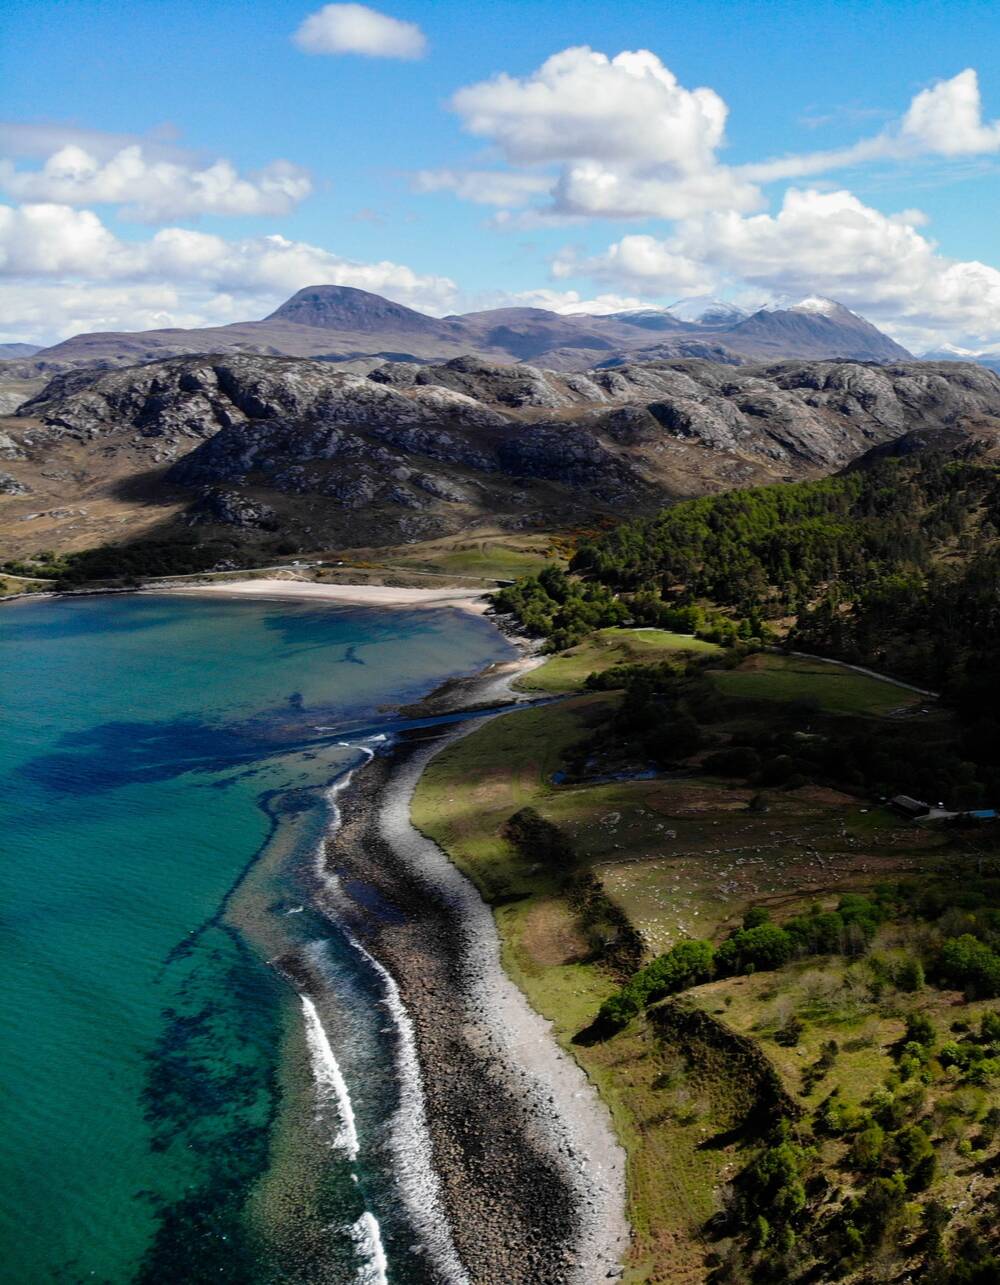 An aerial view of Inverewe Garden focusing on the shoreline by the loch. The water is turquoise and clear. Mountains can be seen in the distance.